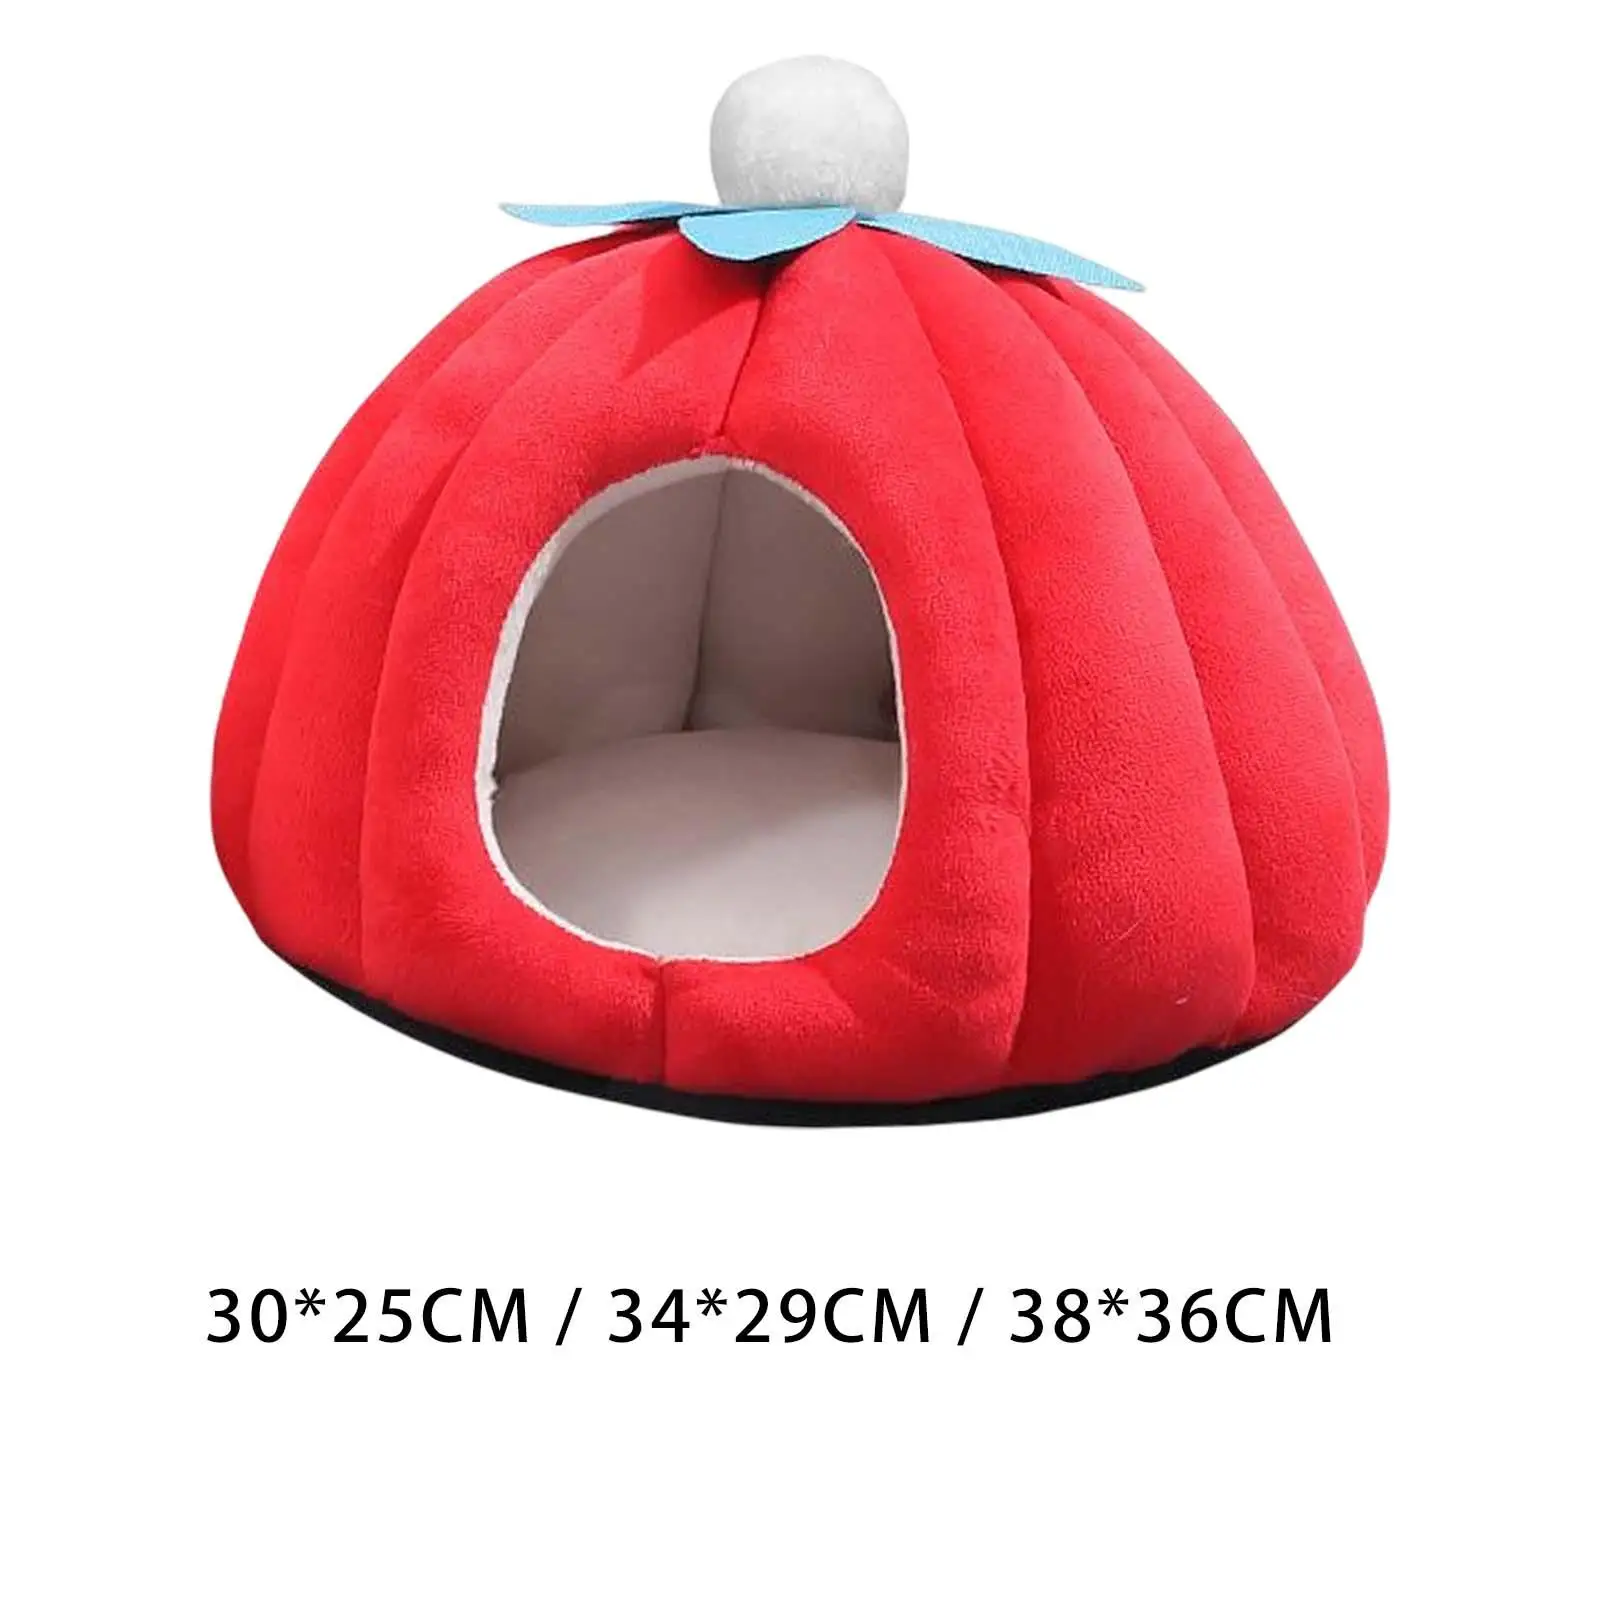 Cat Bed Plush Nonslip Bottom Fully Enclosed No Deformation Pet Bed Pumpkin Shape Soft Small Pet Bed Small Animals Bed